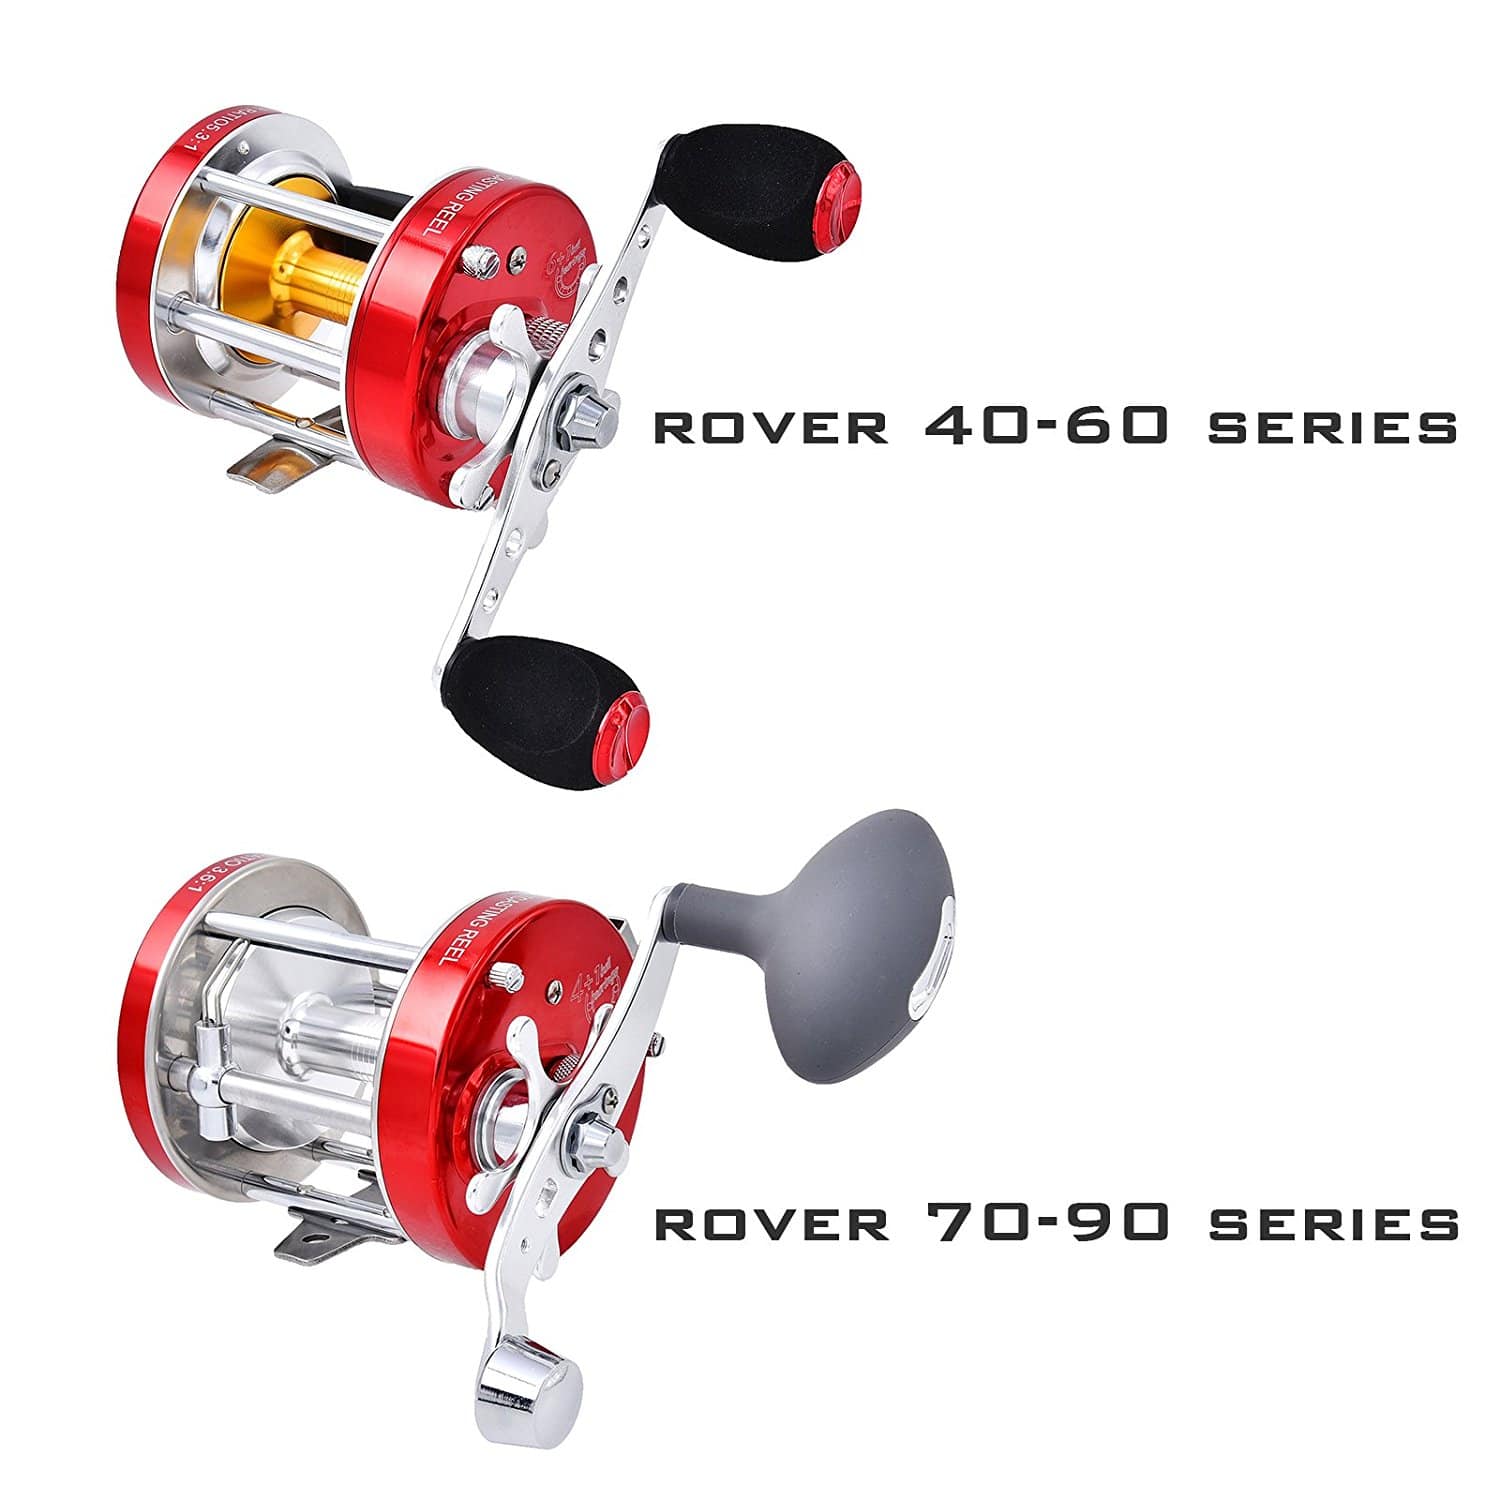 KastKing Rover Round Baitcasting Reel, Perfect Conventional Reel